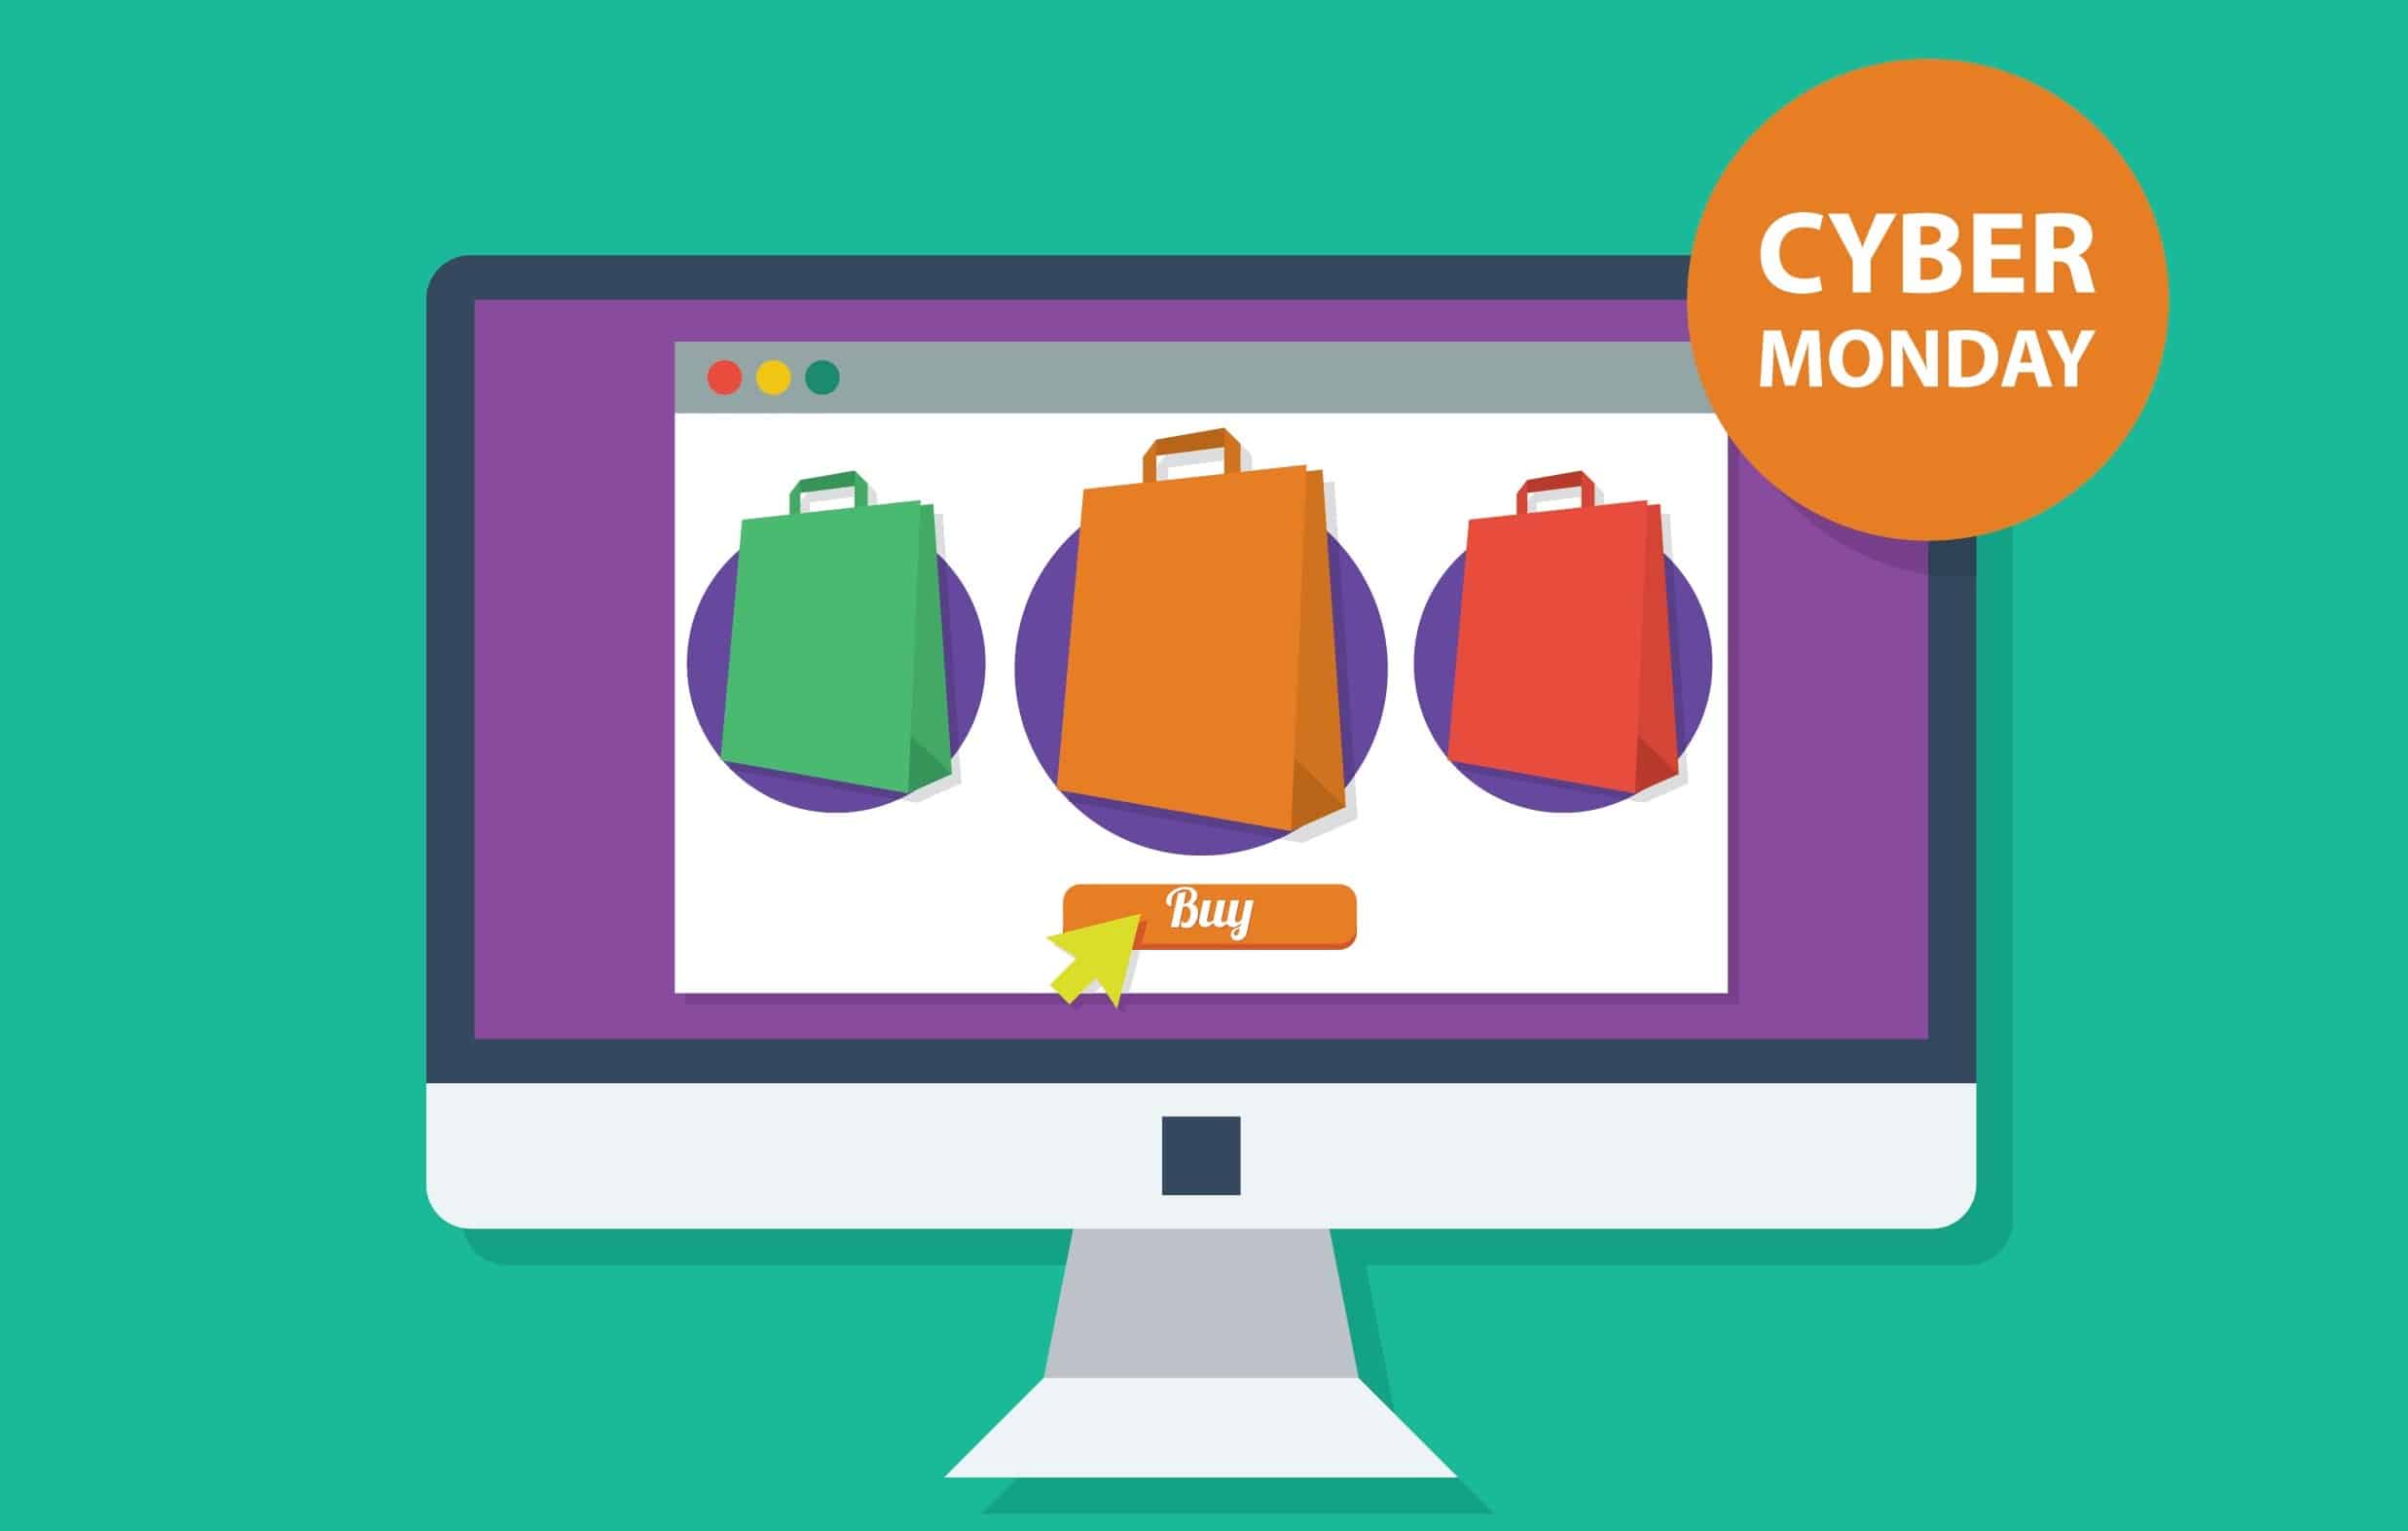 What Does Cyber Mean - Cyber Monday